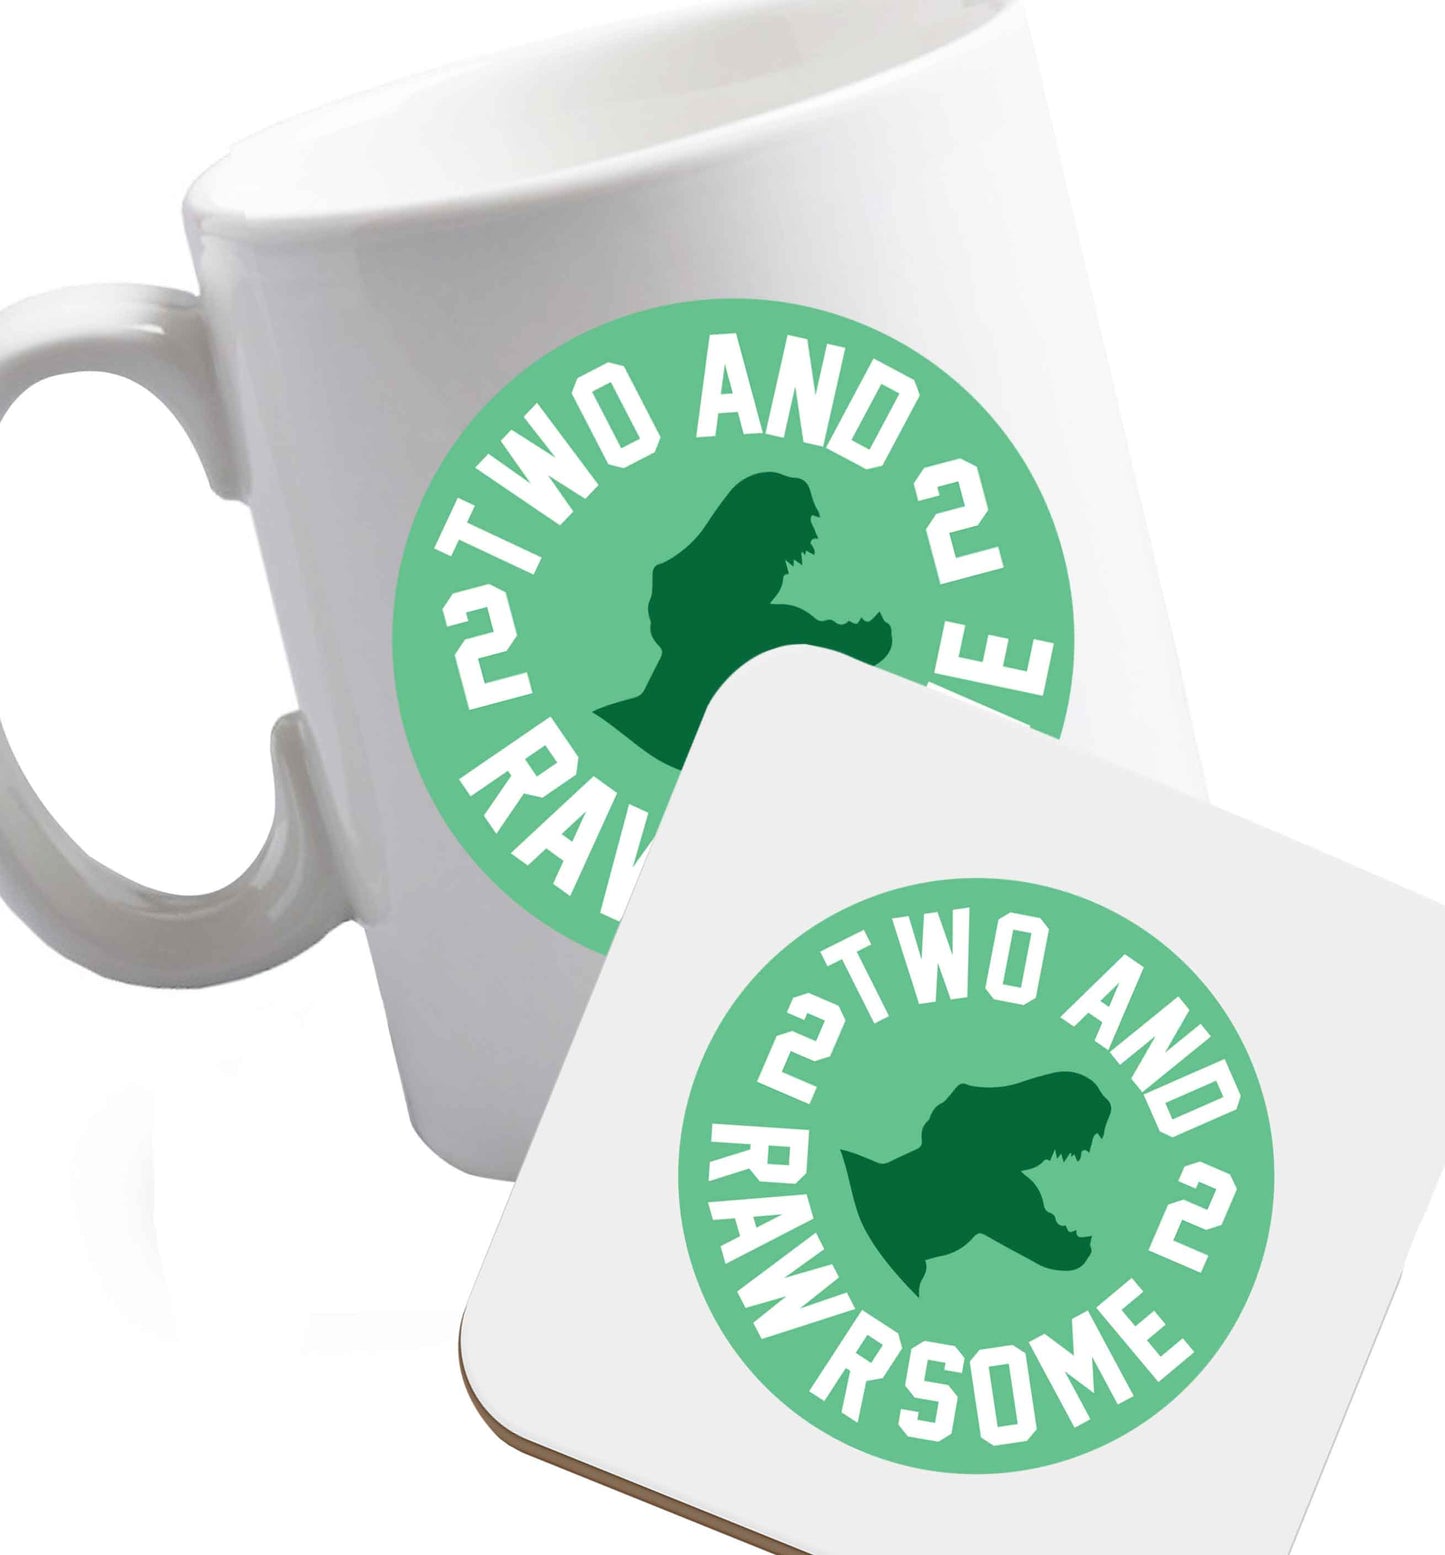 10 oz Two and rawrsome ceramic mug and coaster set right handed